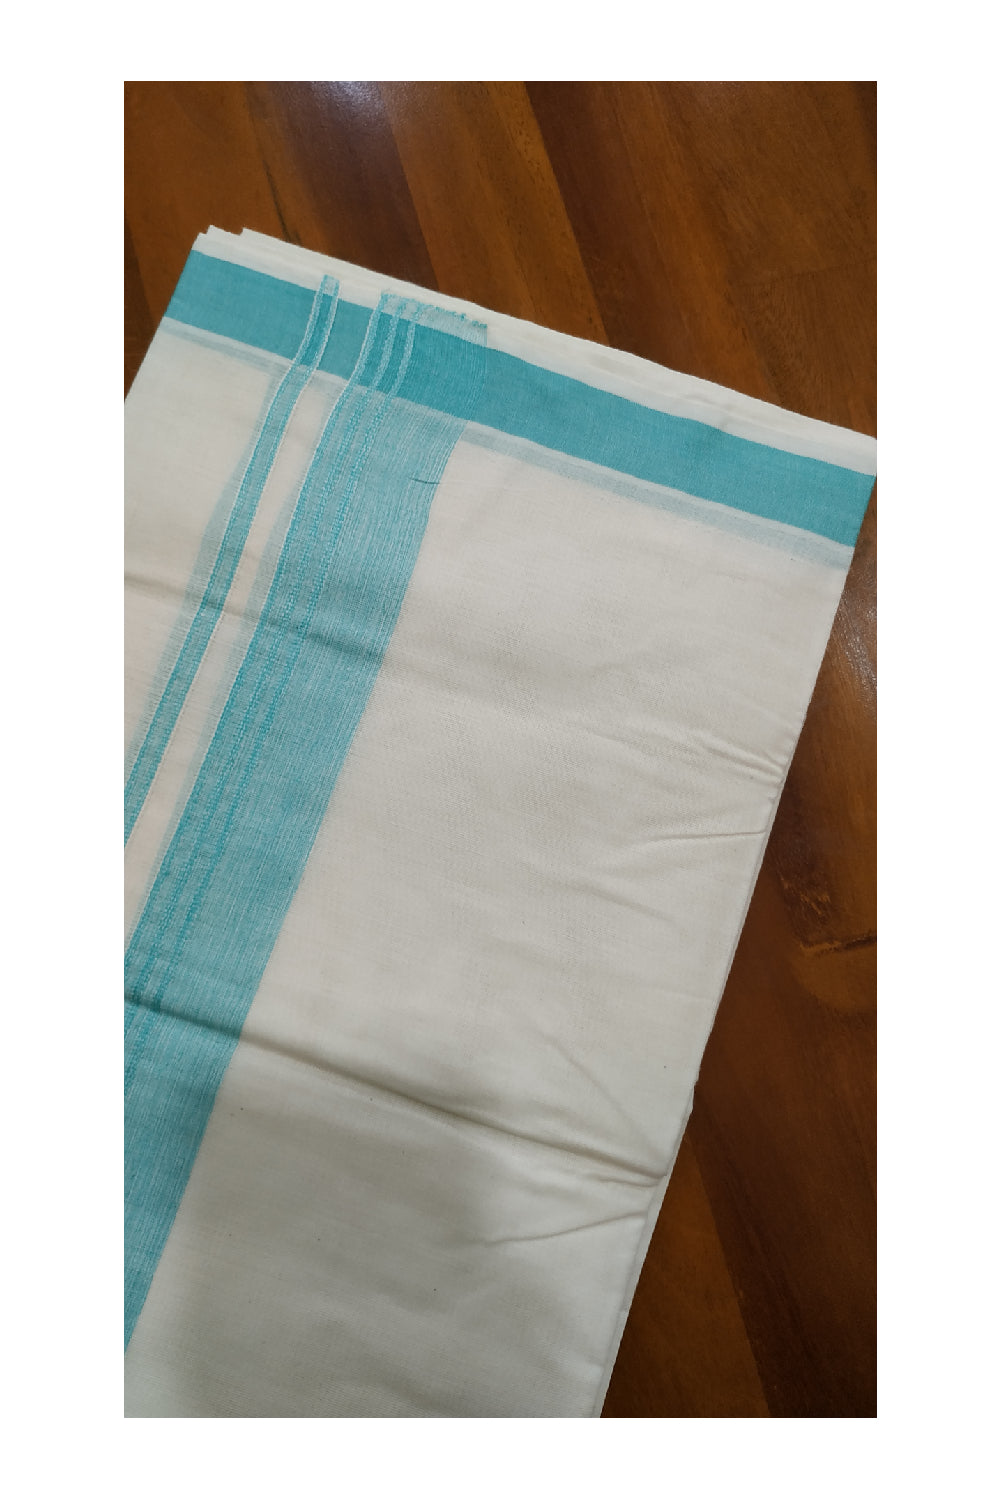 Off White Pure Cotton Mundu with Turquoise Border (South Indian Dhoti)